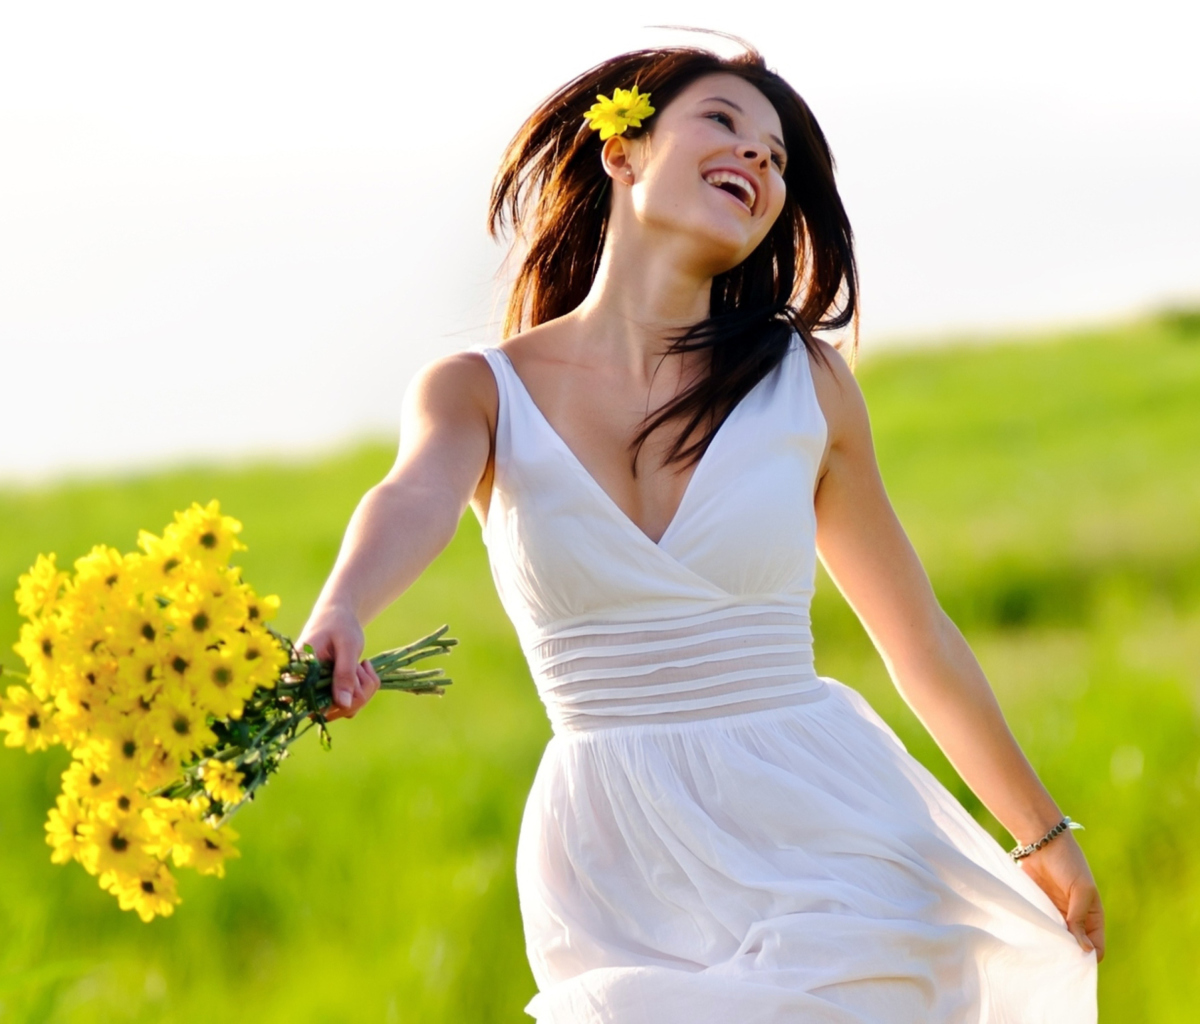 Happy Girl With Yellow Flowers wallpaper 1200x1024